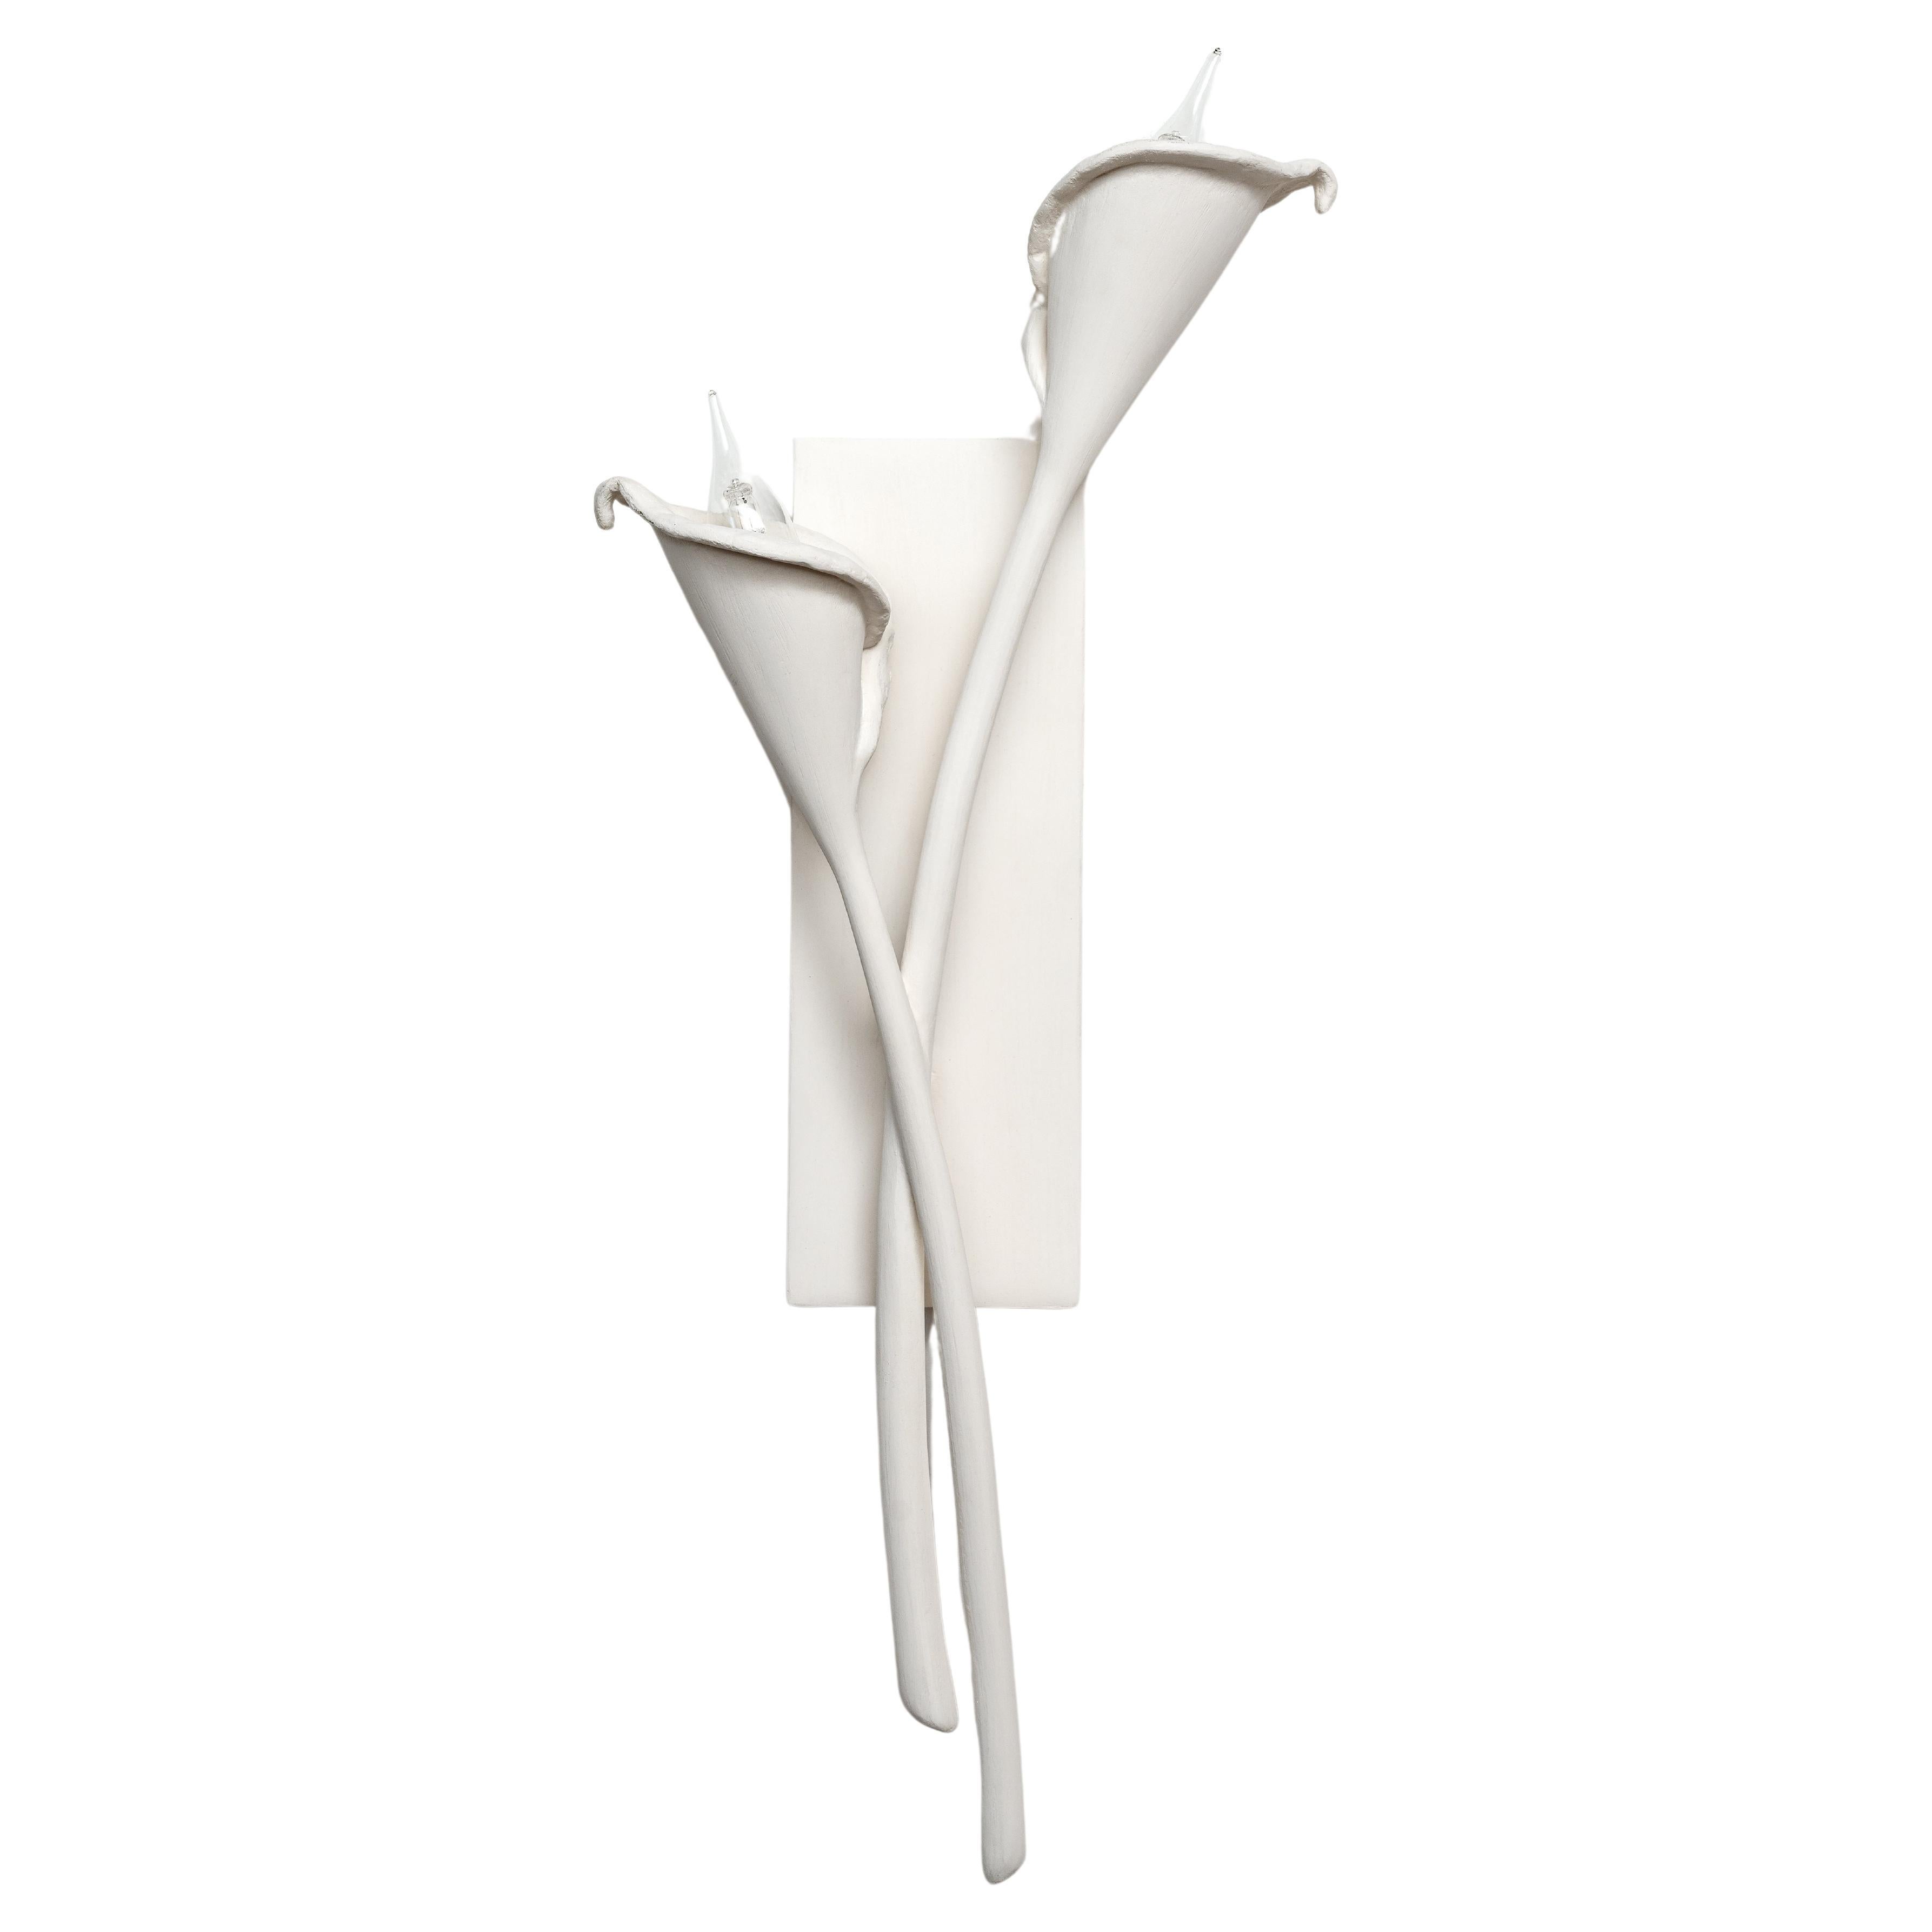 Calla Lily Contemporary Wall Sconce, Wandleuchte in weißem Gips, Paar, Benediko